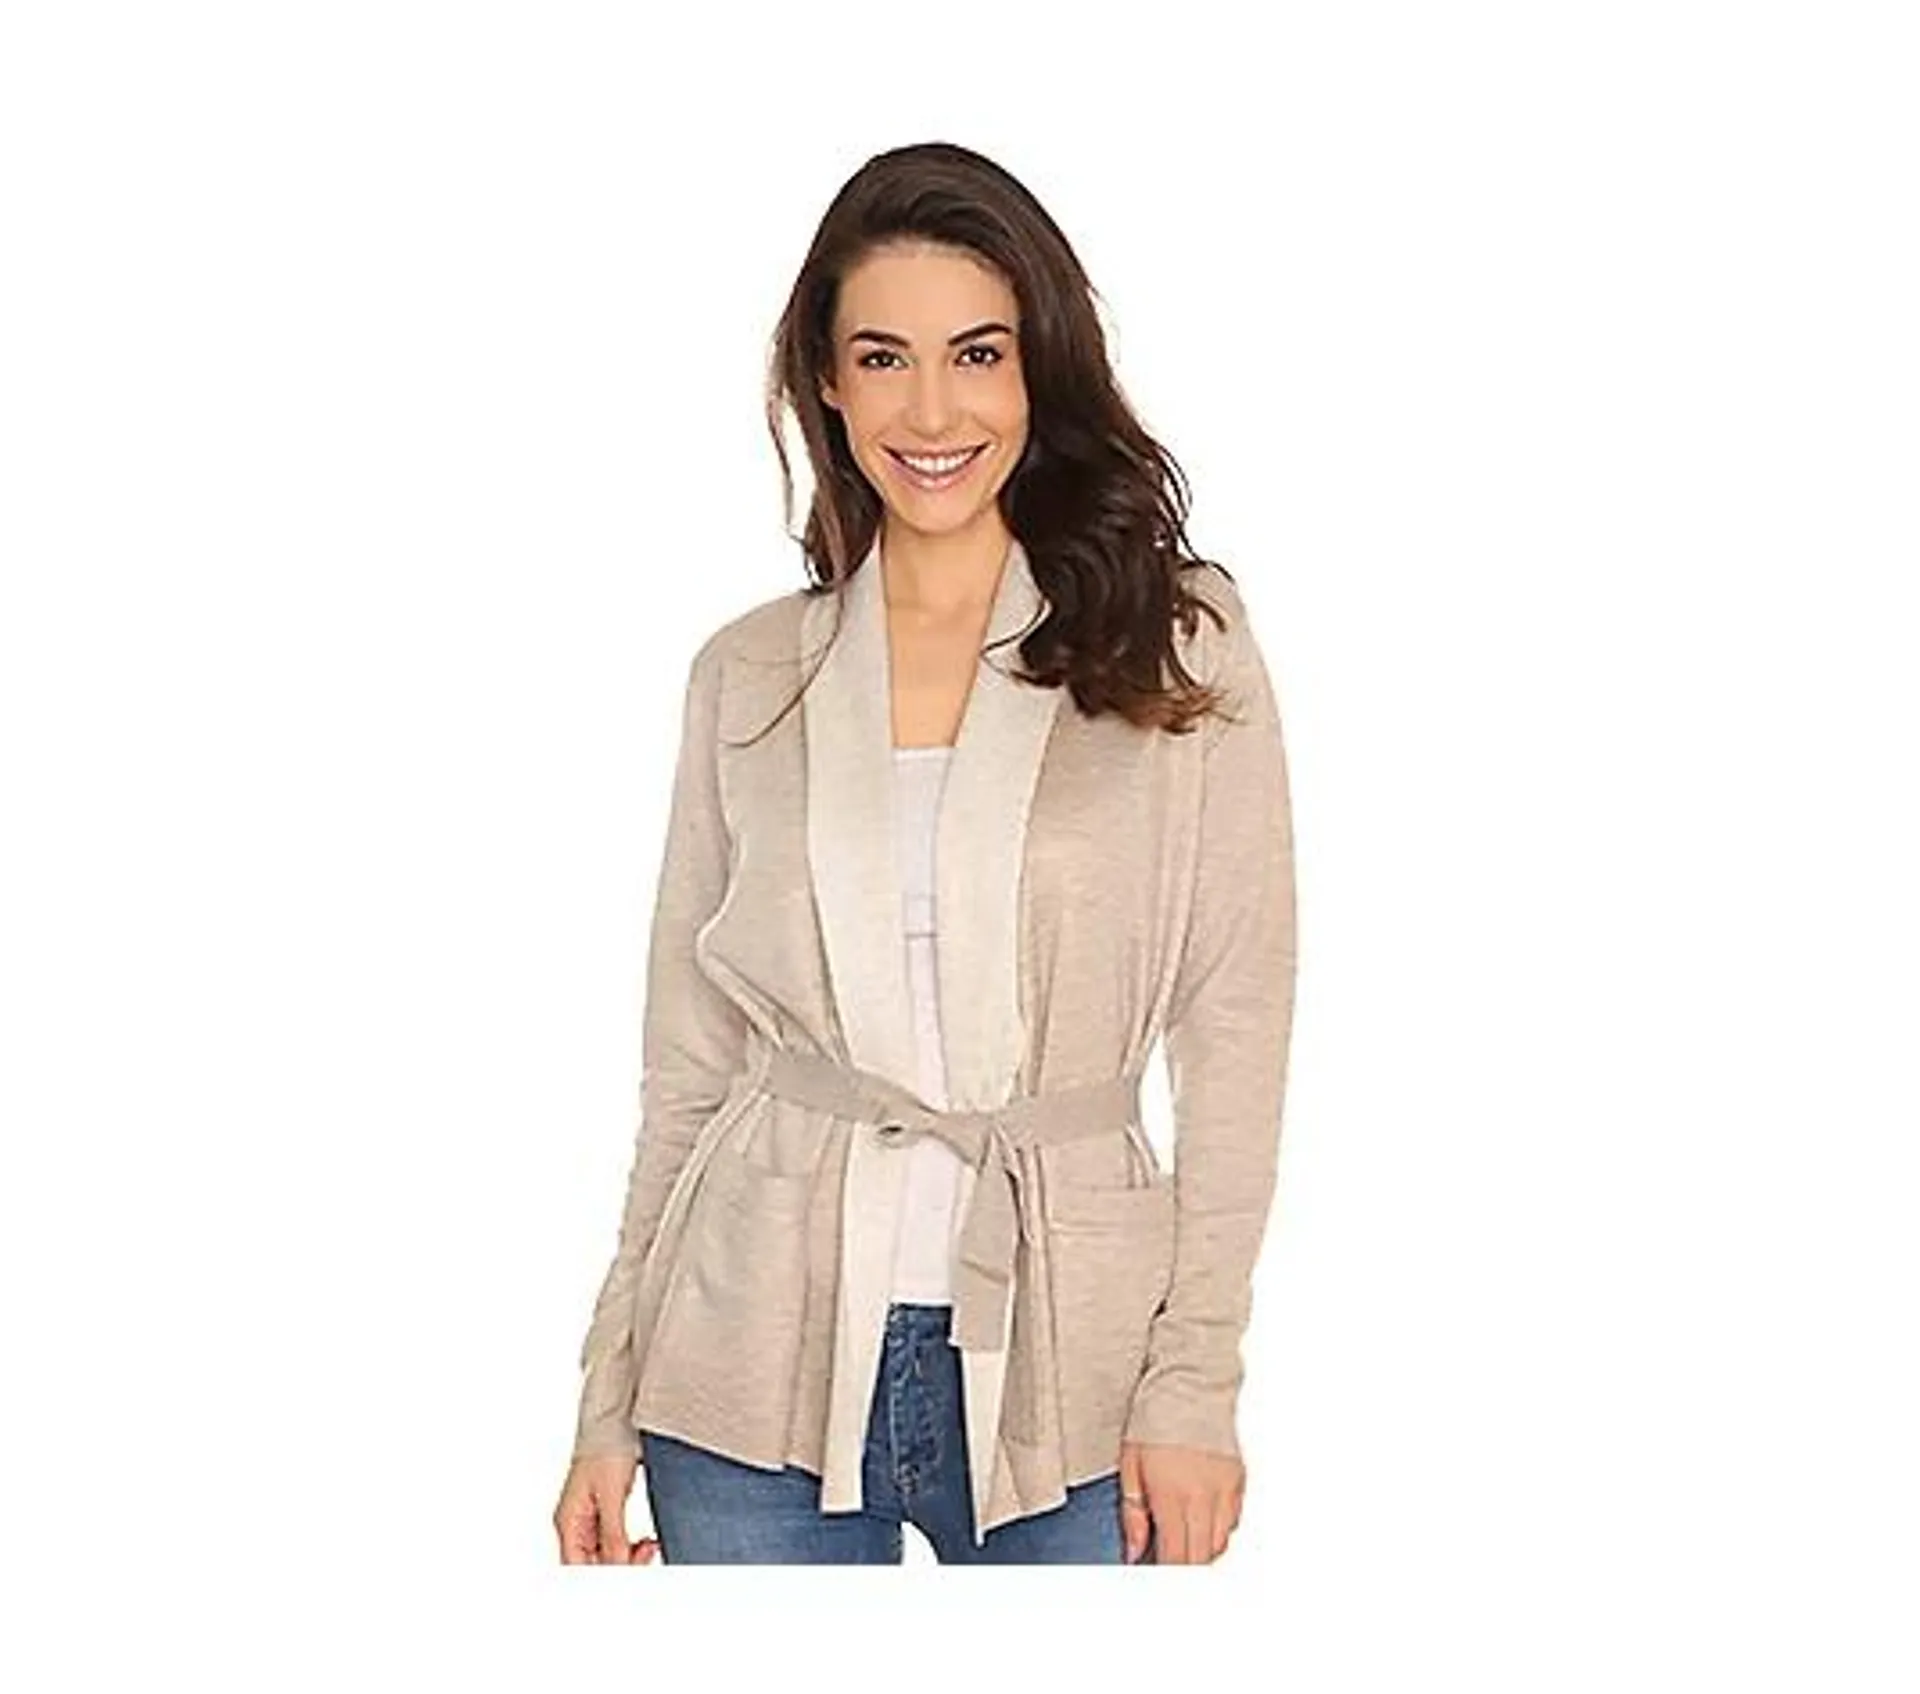 B-Ware FRIEDA LOVES NYC Cardigan, 1/1-Arm offene Front Doubleface-Strick